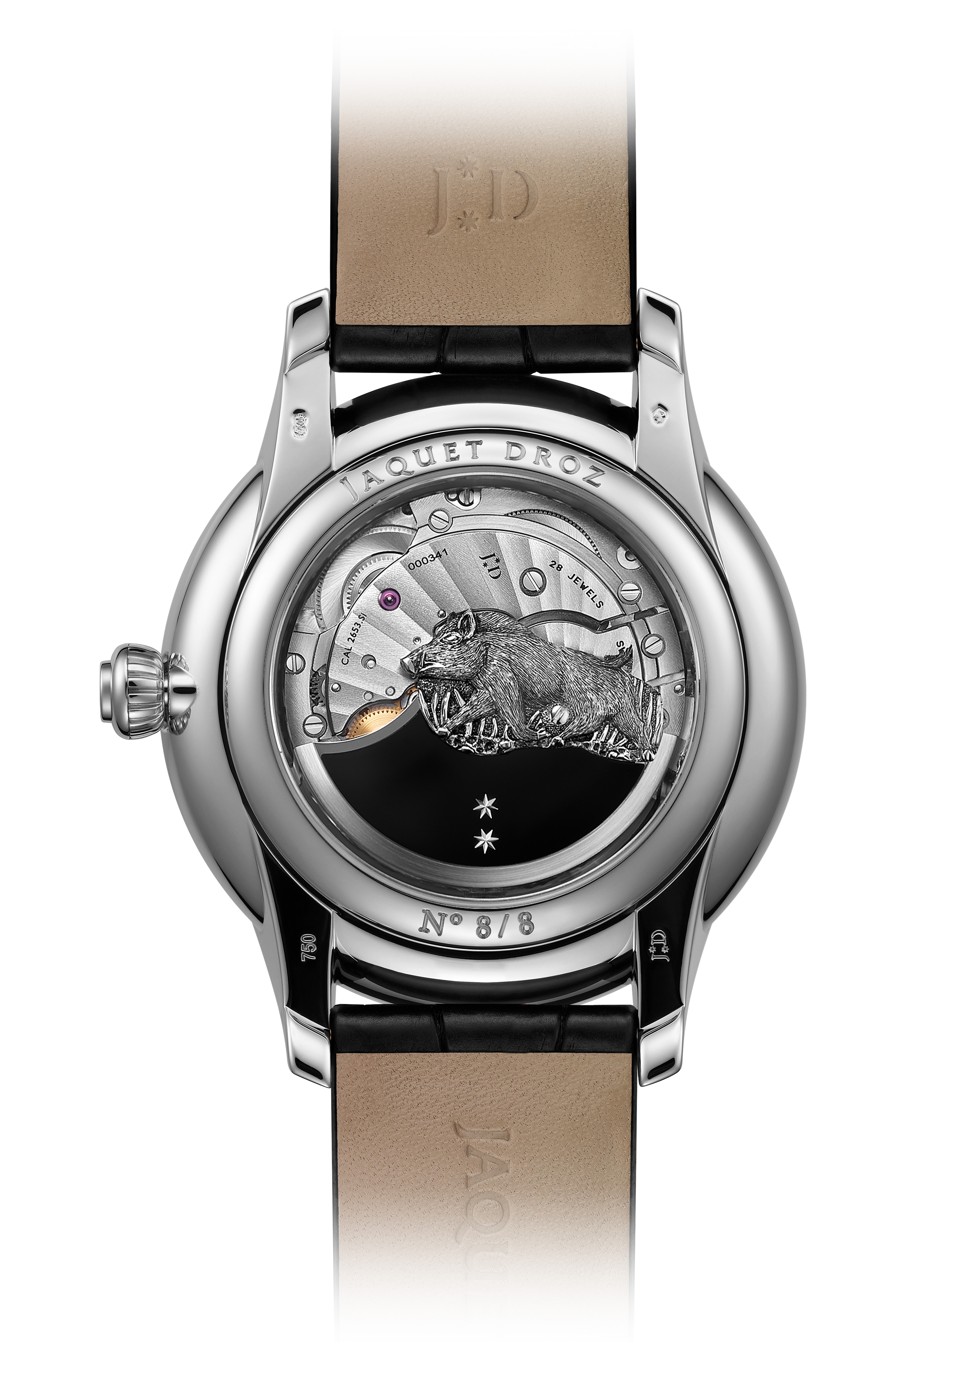 The back of Jaquet Droz's Petite Heure Minute Relief Pig watch.